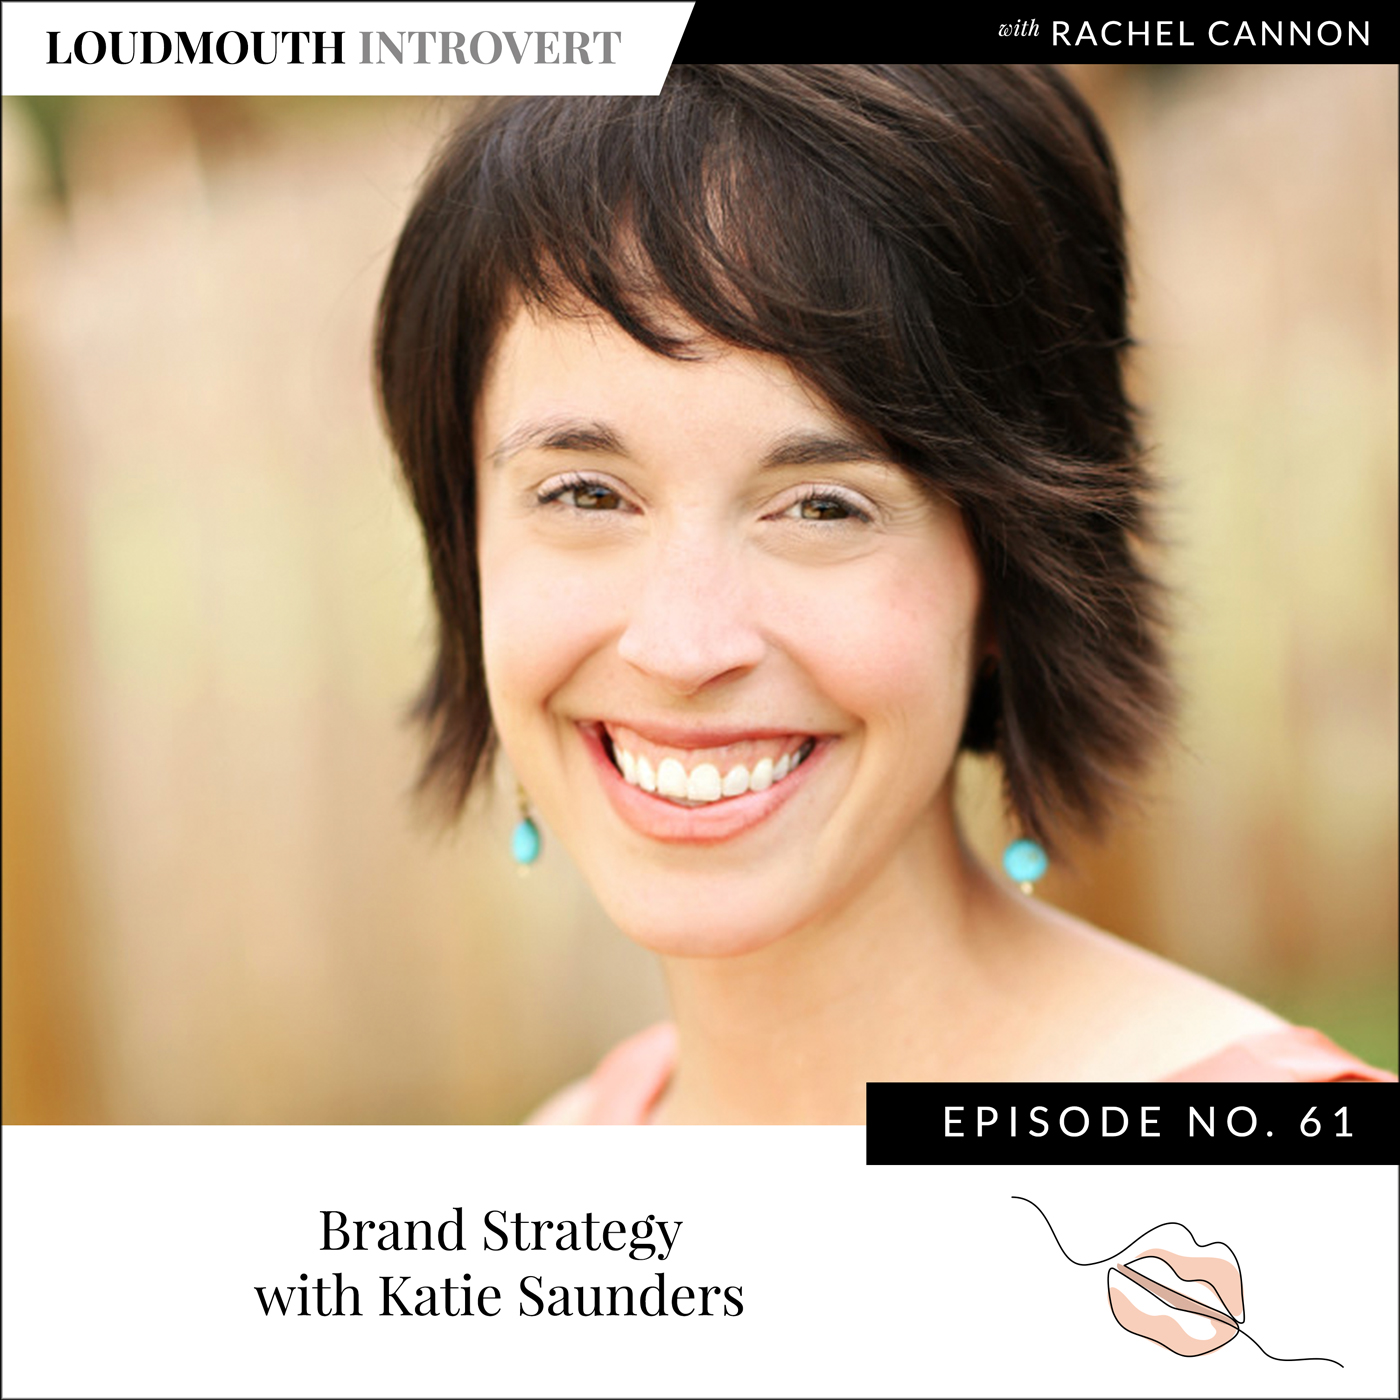 Brand Strategy with Katie Saunders